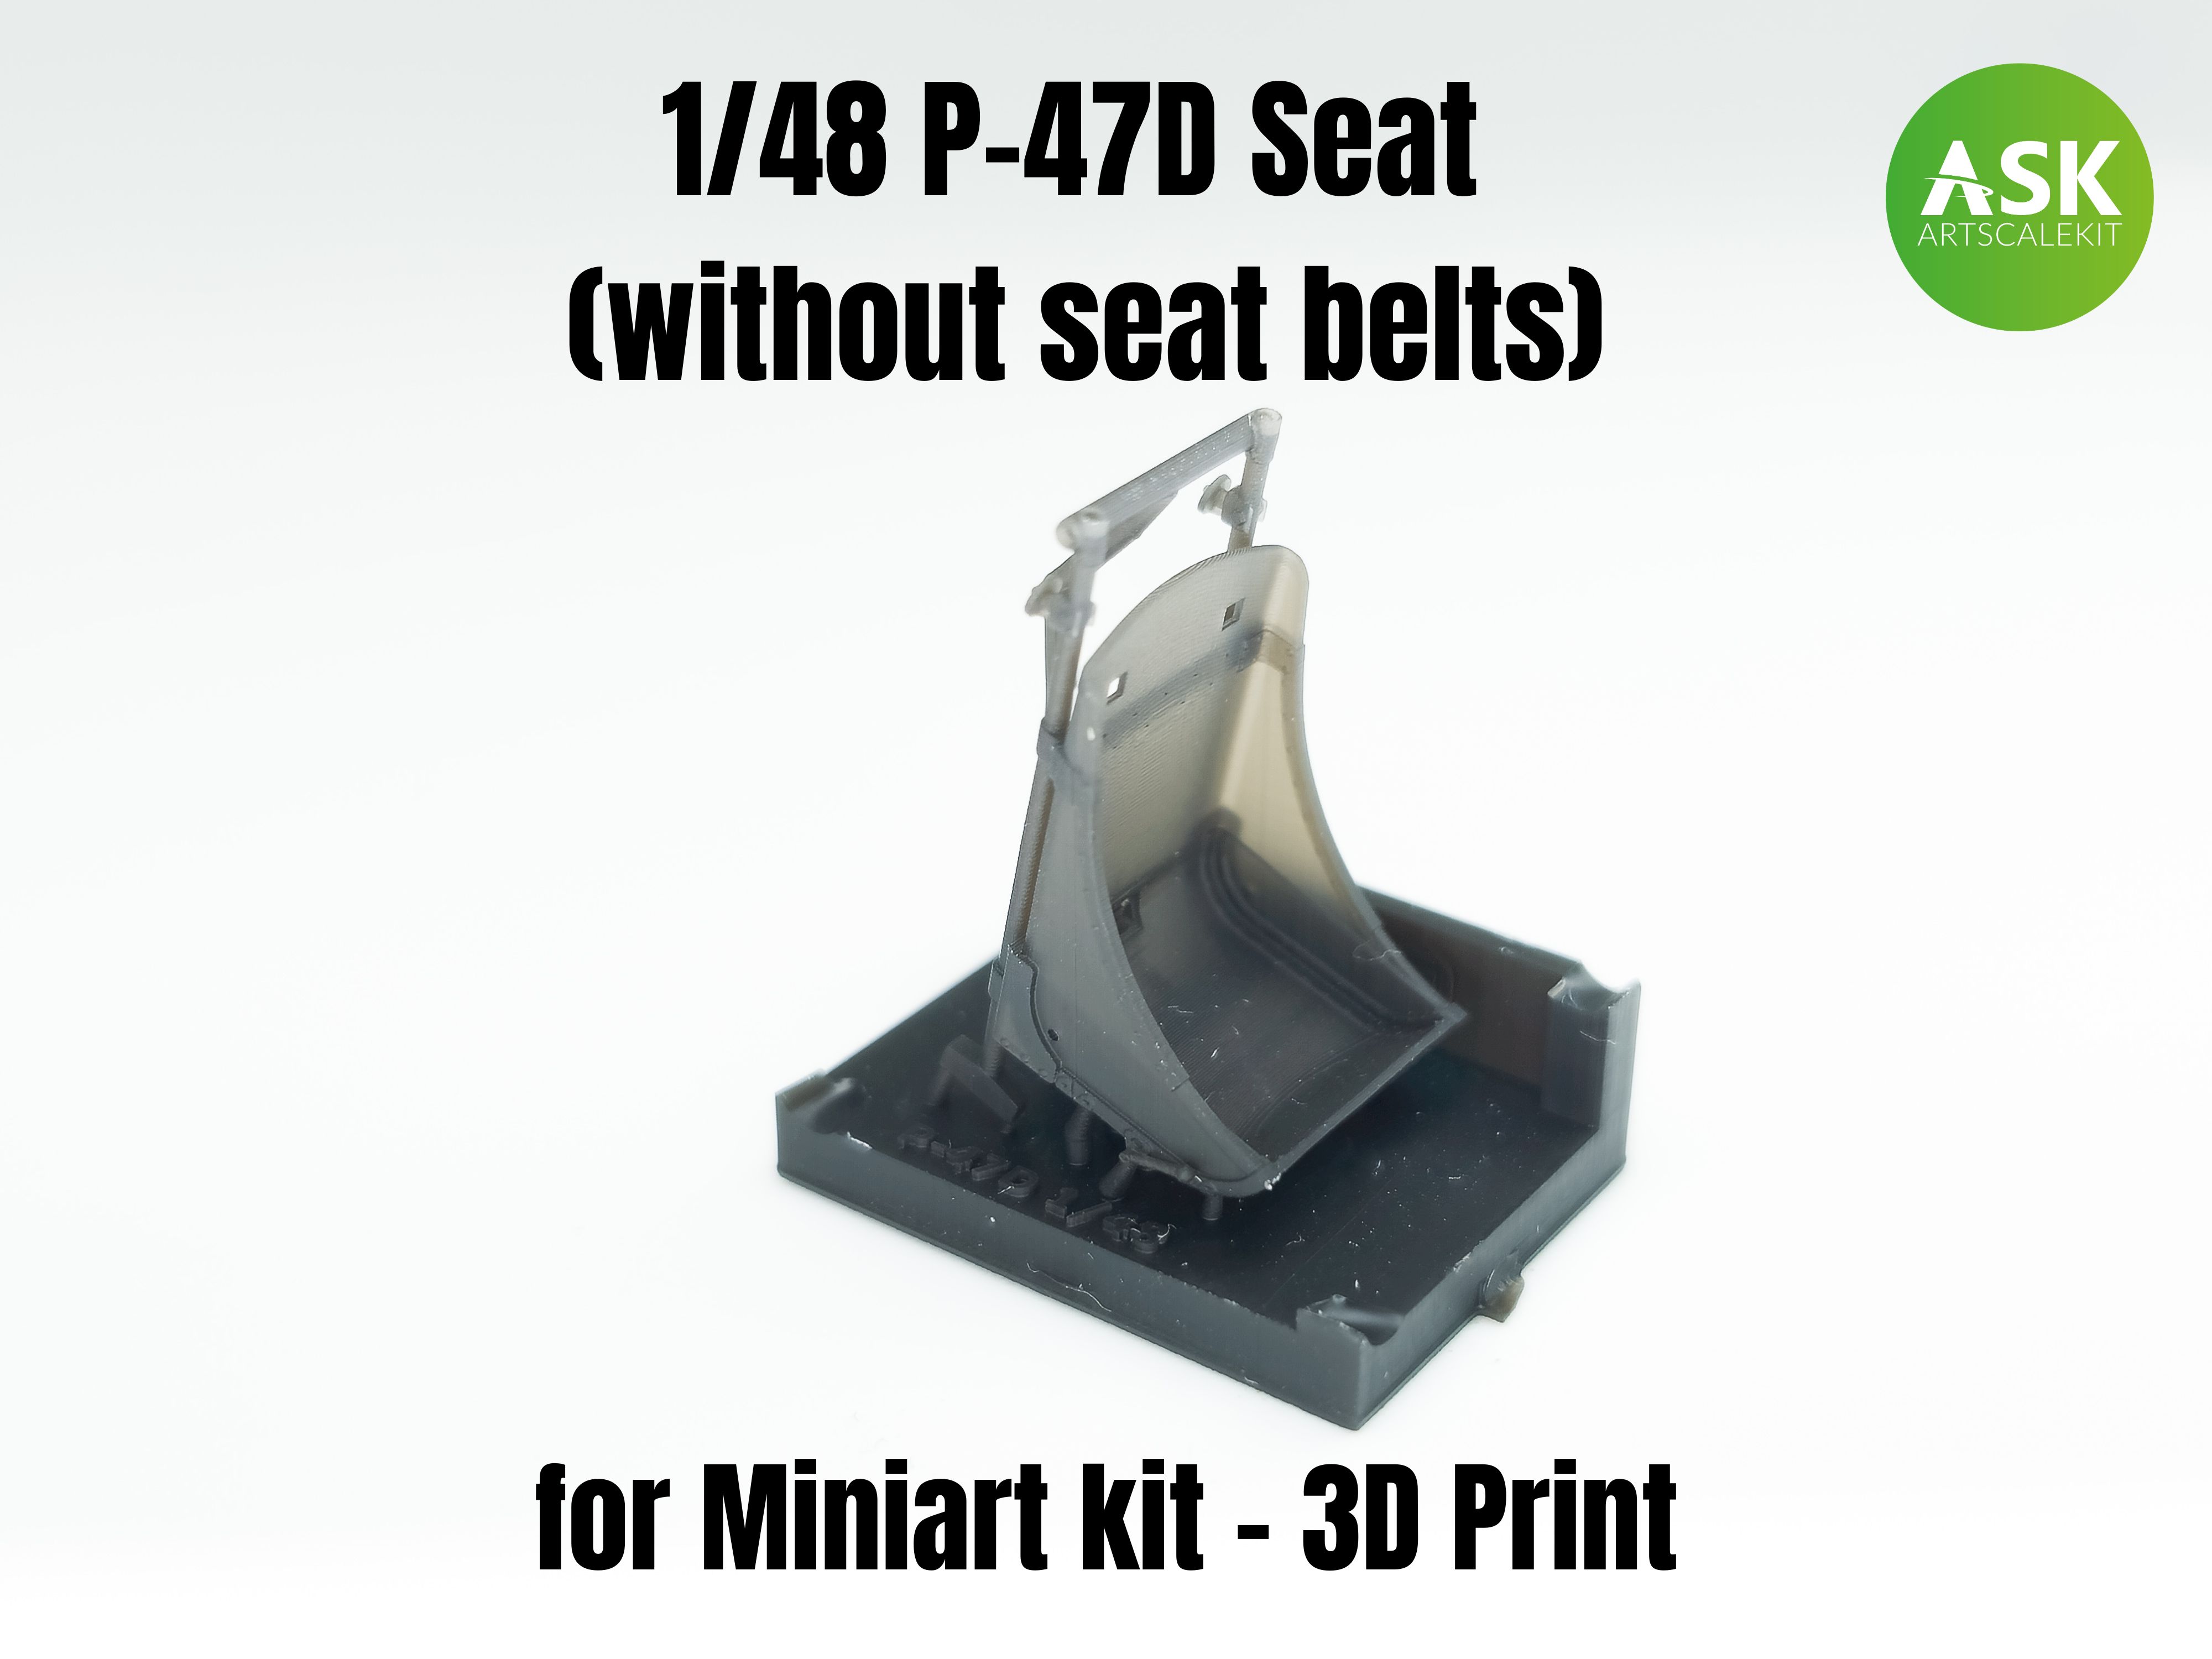 1/48 P-47D Seat (without seat belts)